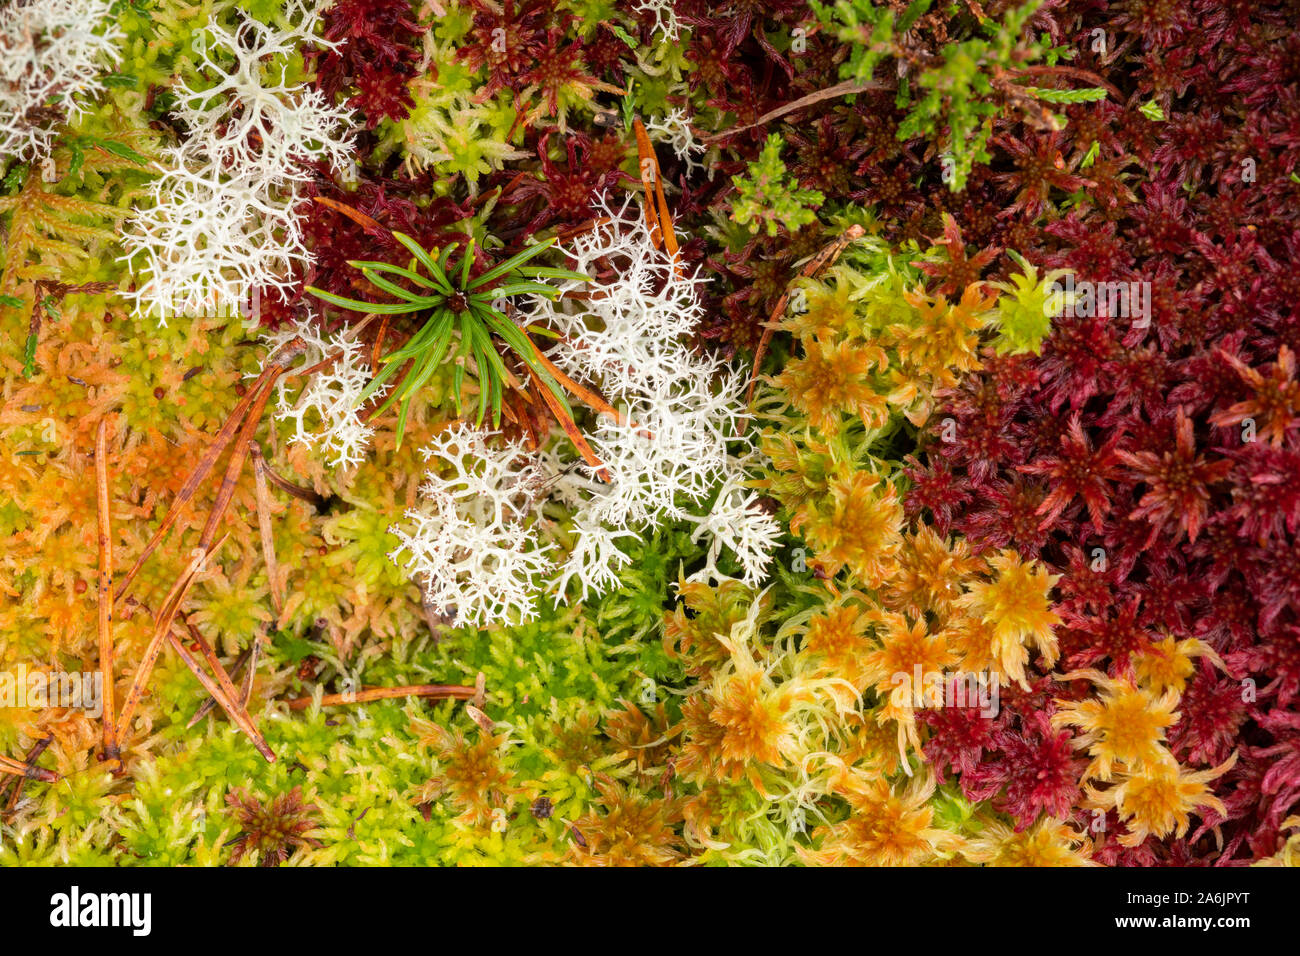 Forest floor with colourful sphagnum moss (sphagnum angustifolium), reindeer lichen (cladonia portentosa) and Scots pine seedling (pinus sylvestris). Stock Photo